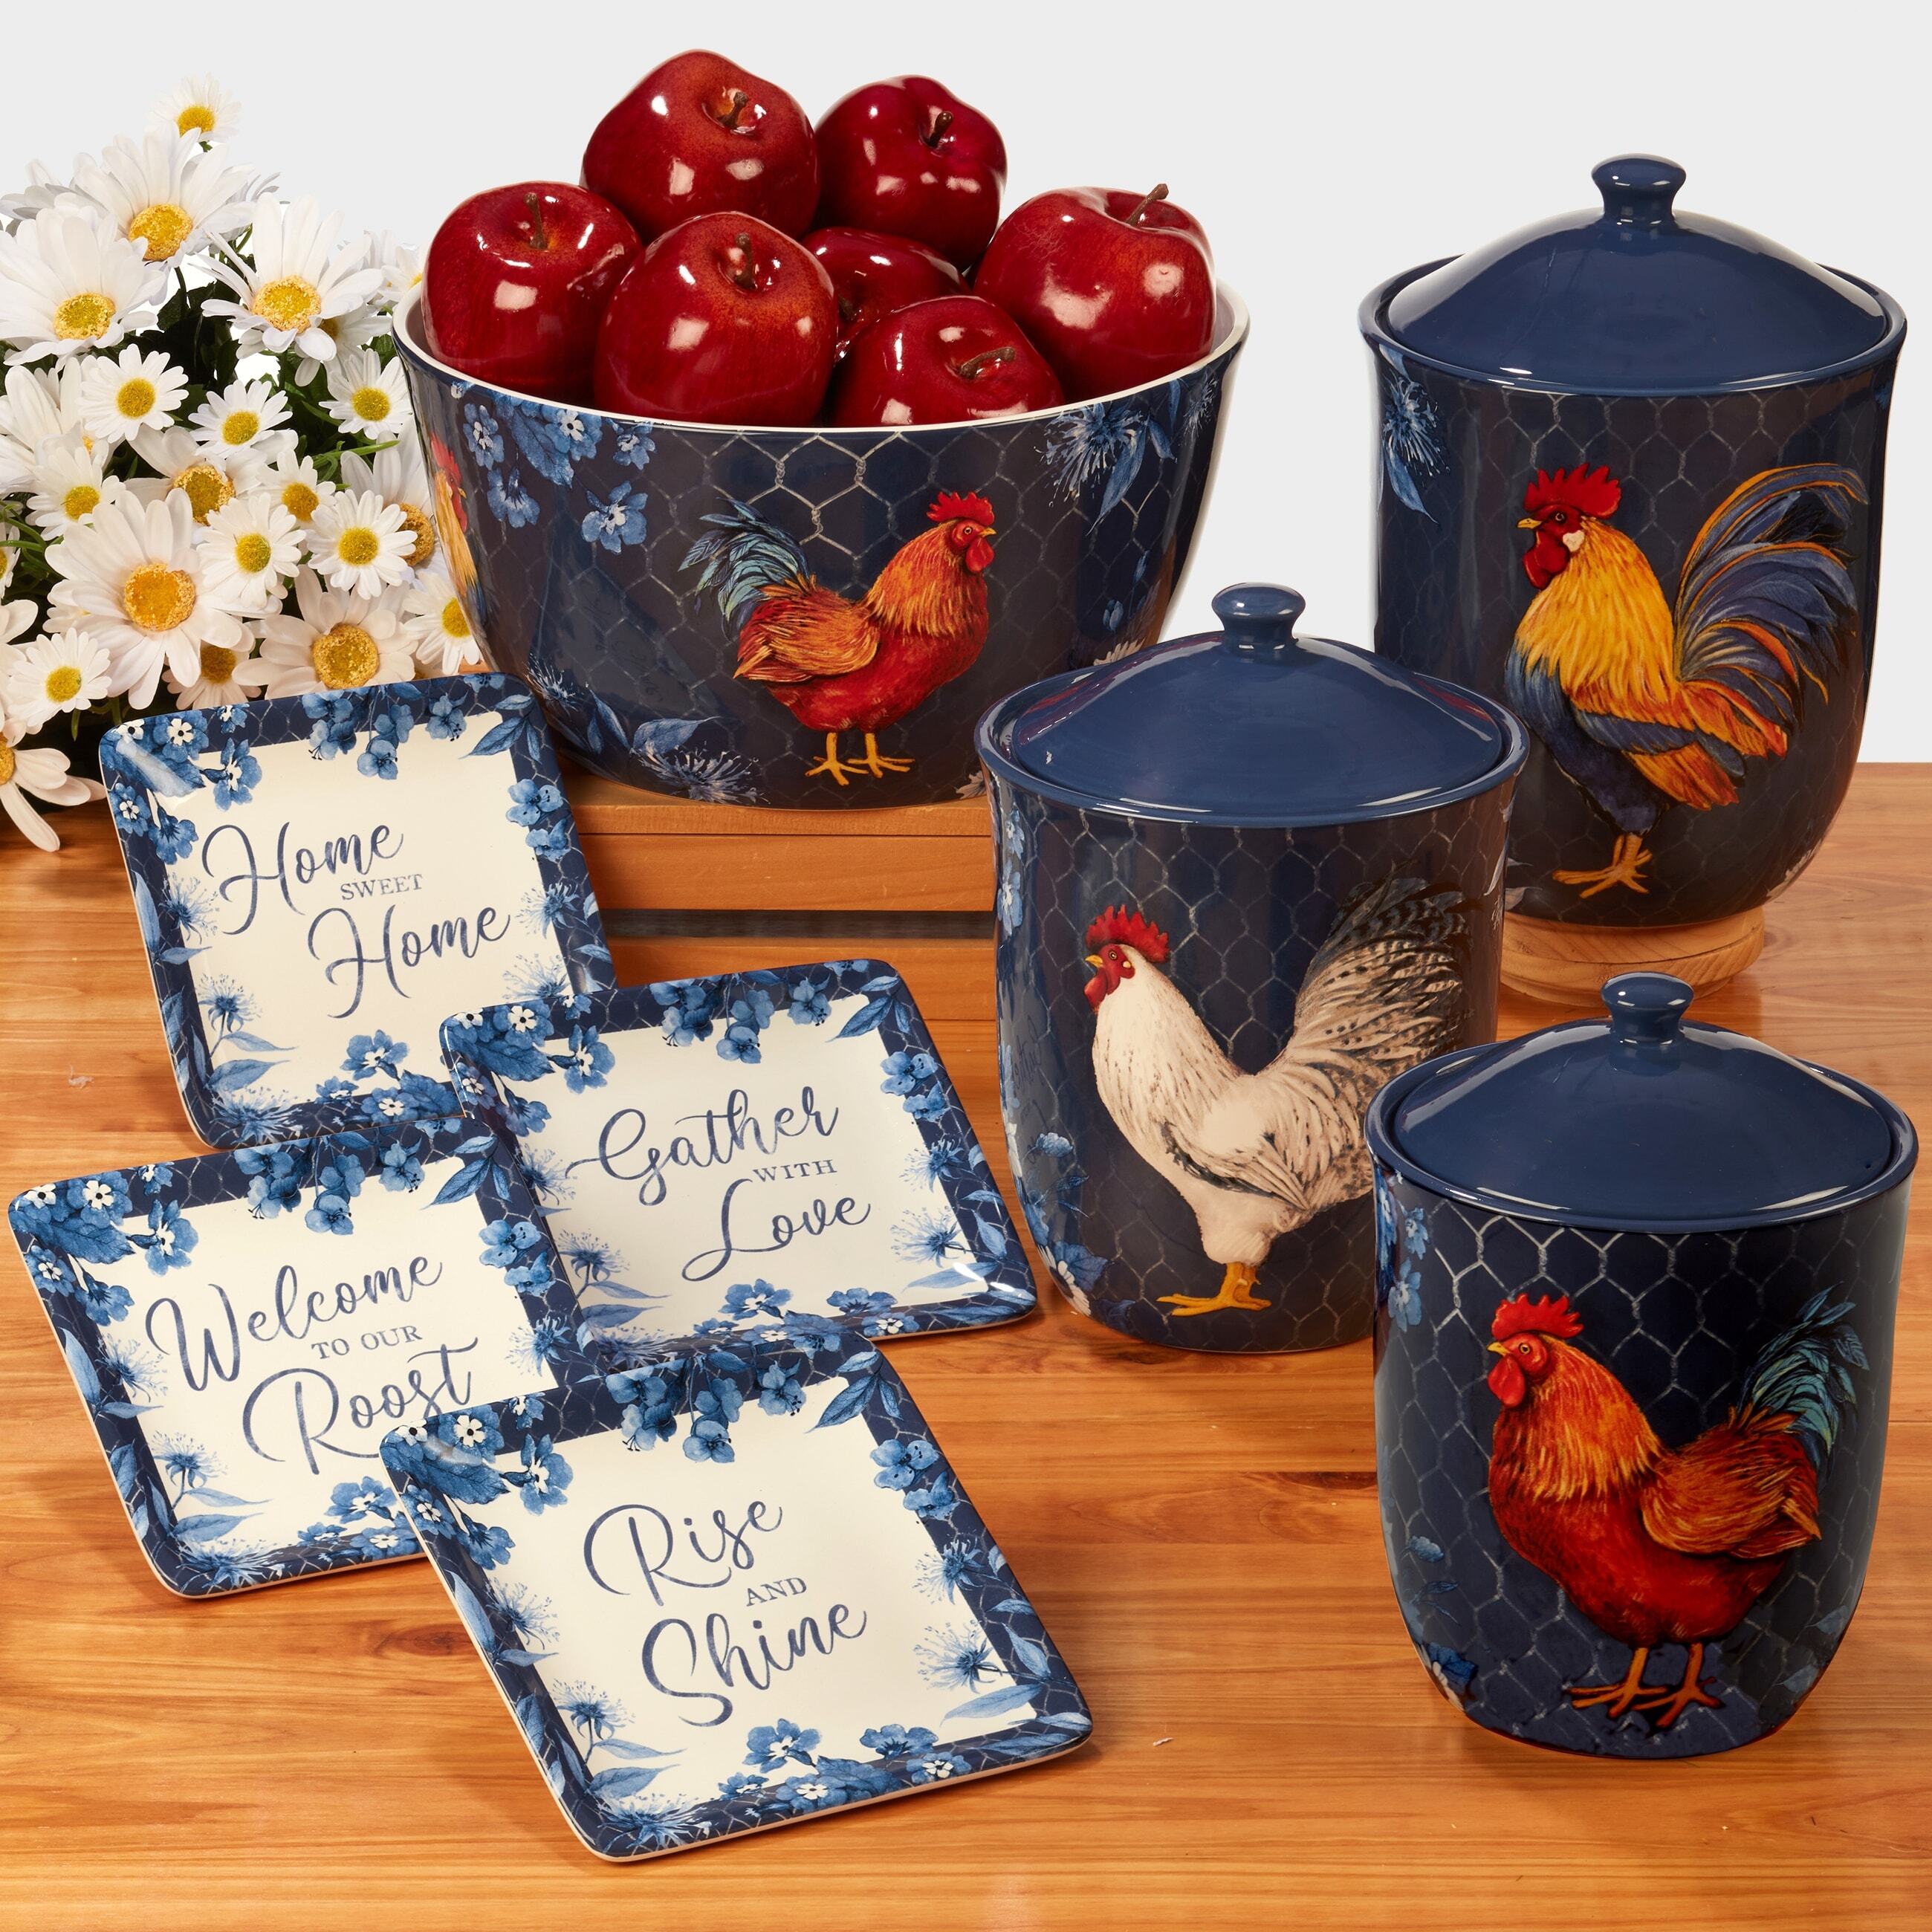 Rustic country kitchen canisters with animals